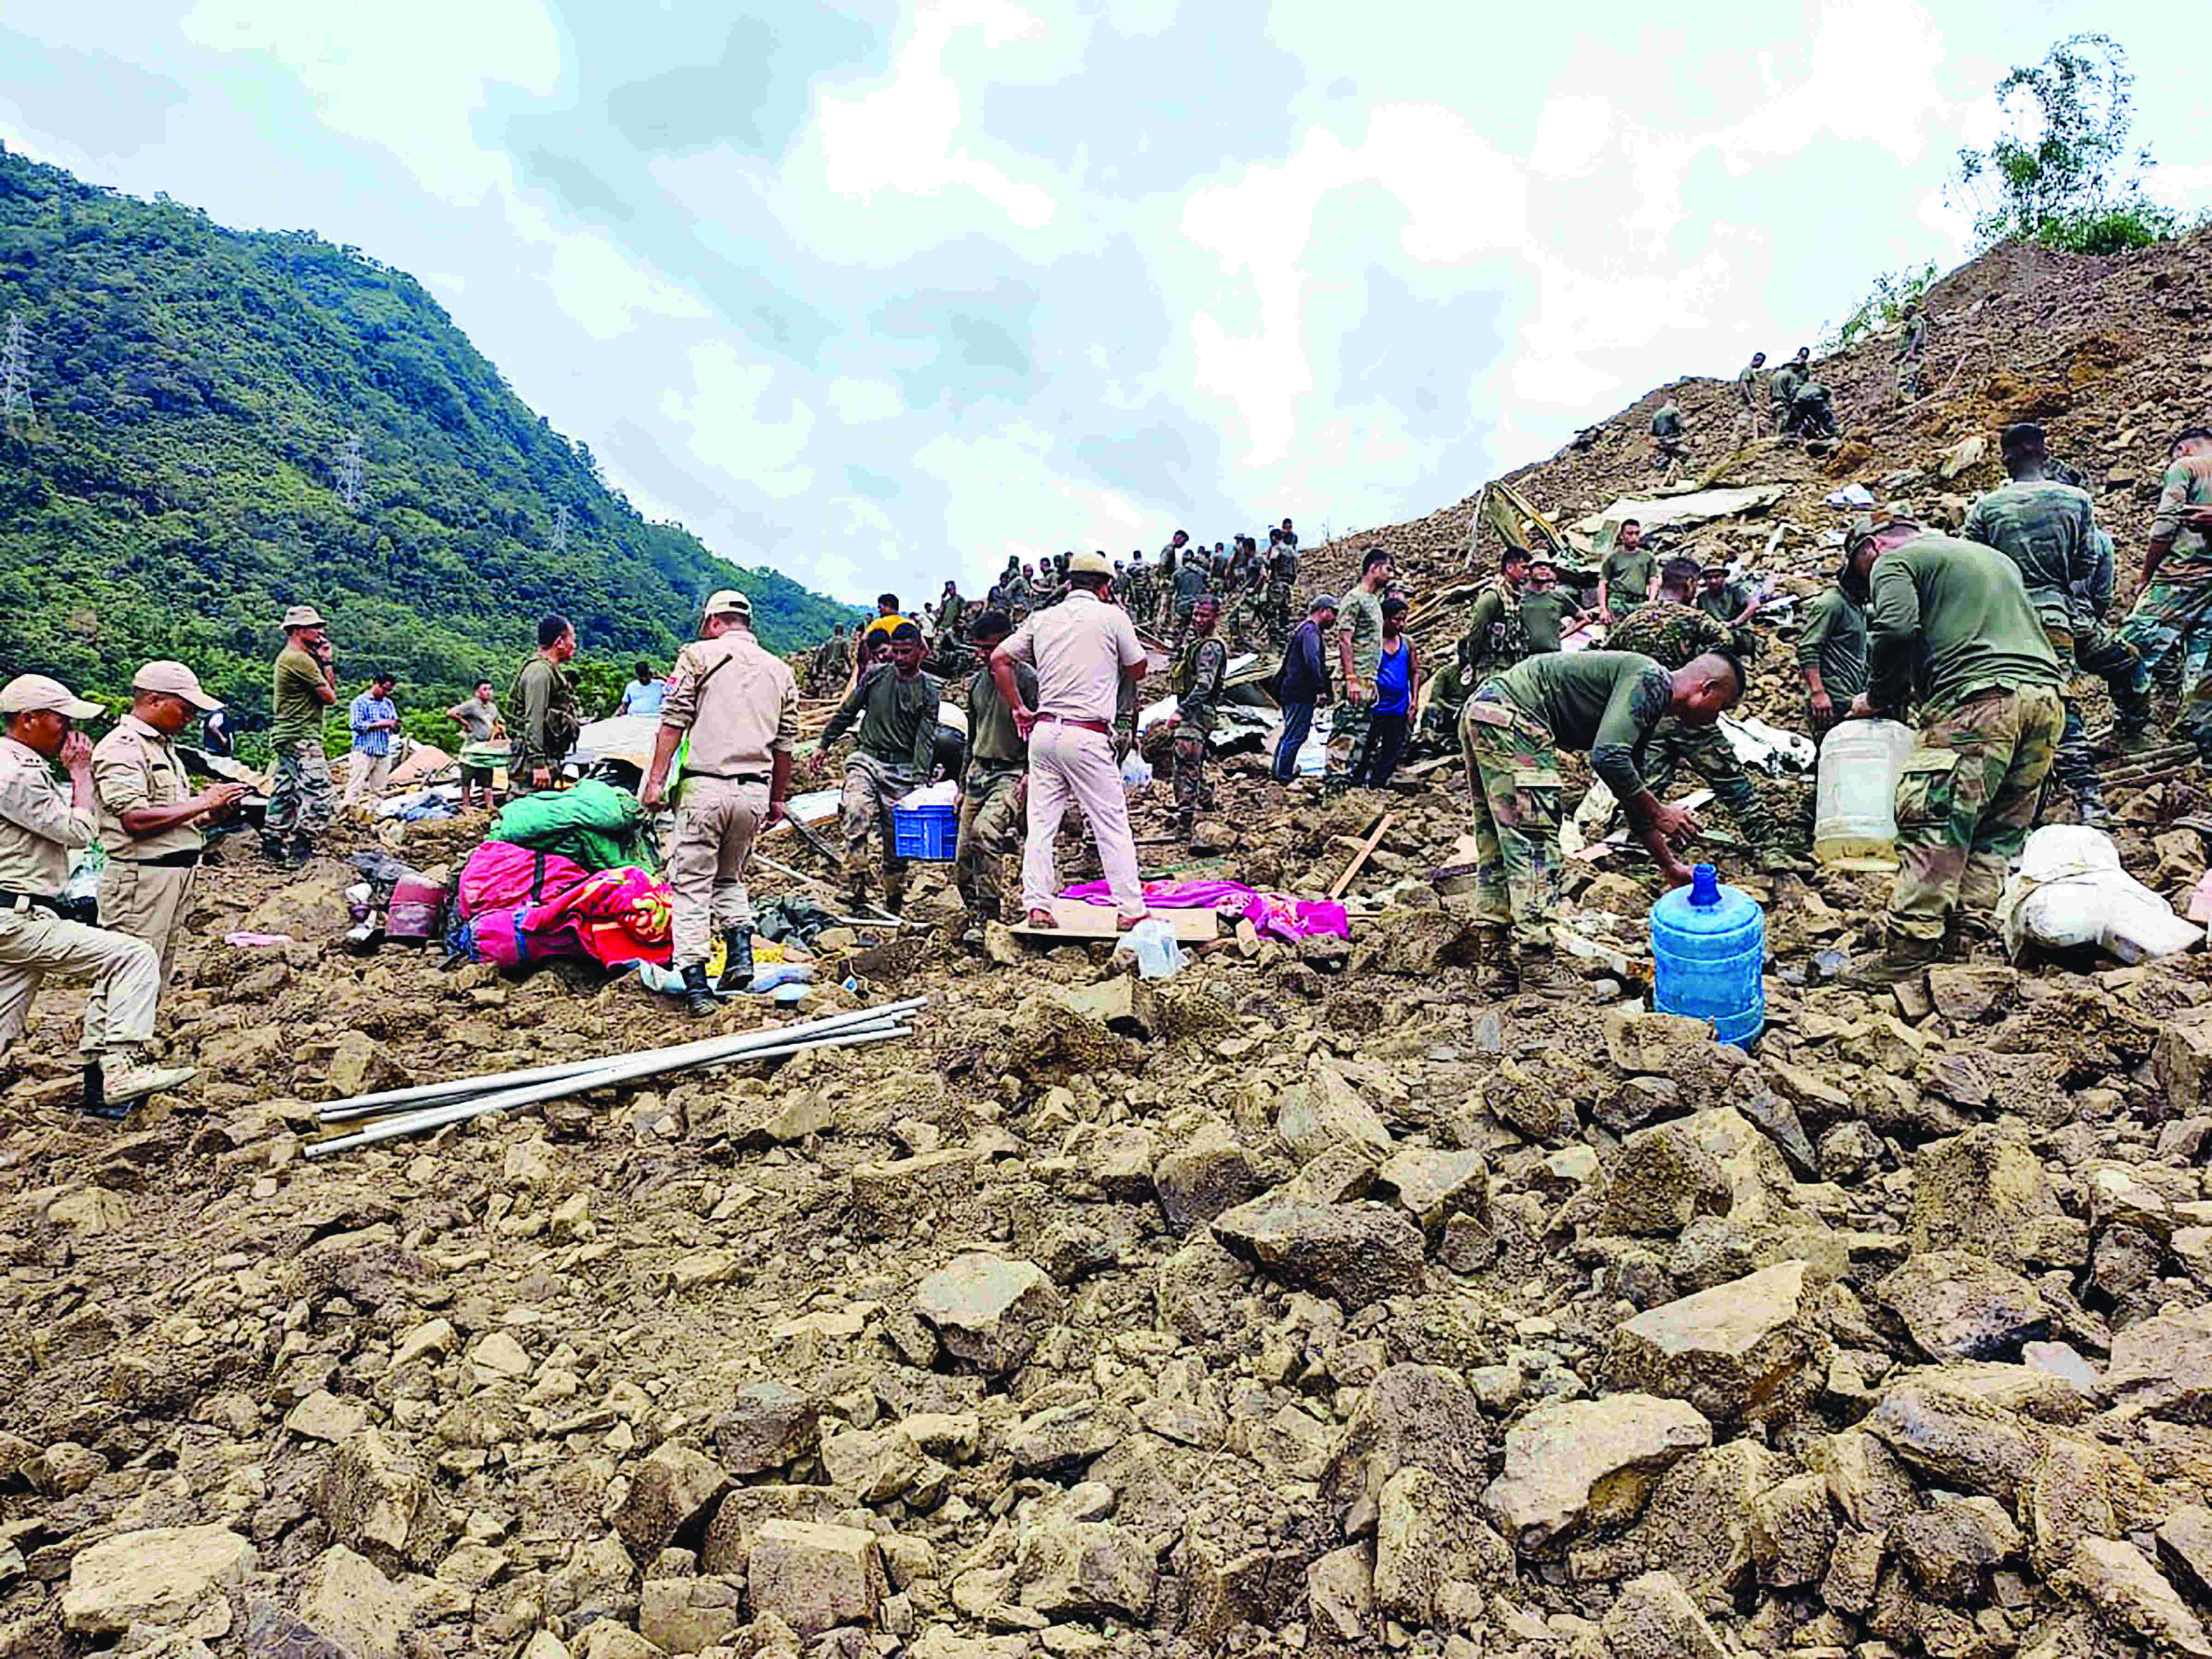 8 killed, 72 missing as landslide hits railway construction site